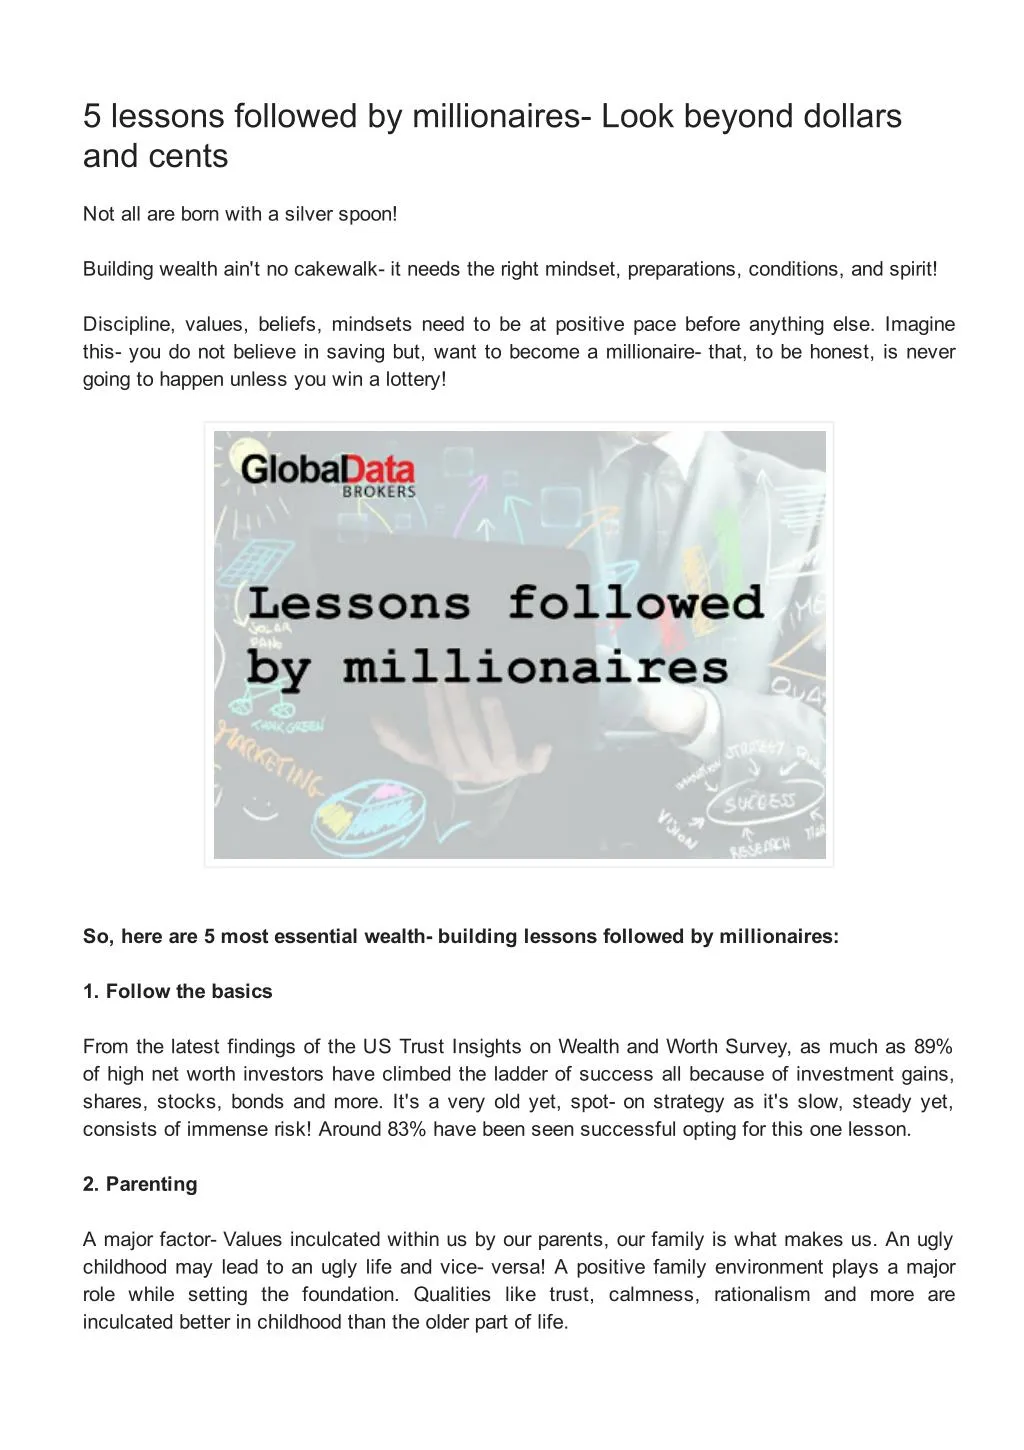 5 lessons followed by millionaires look beyond